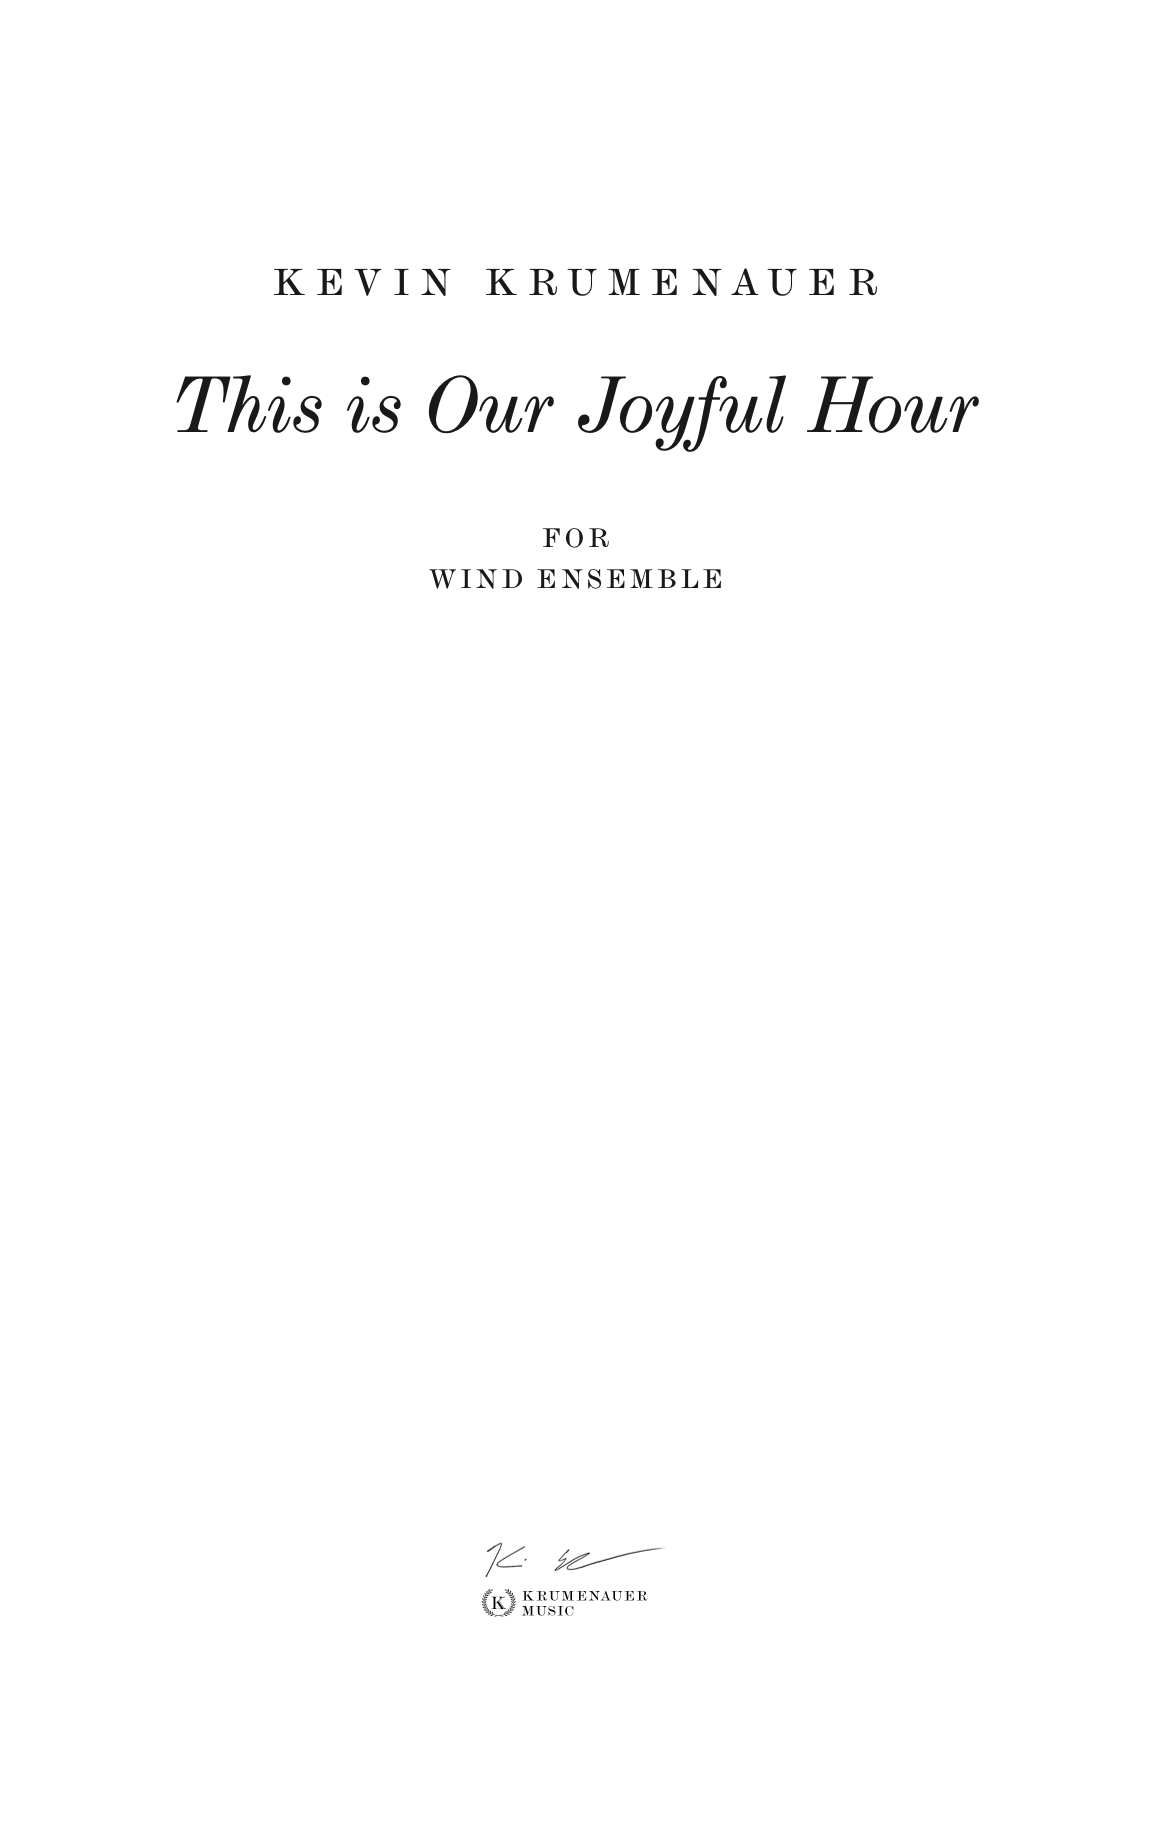 This Is Our Joyful Hour by Kevin Krumenauer